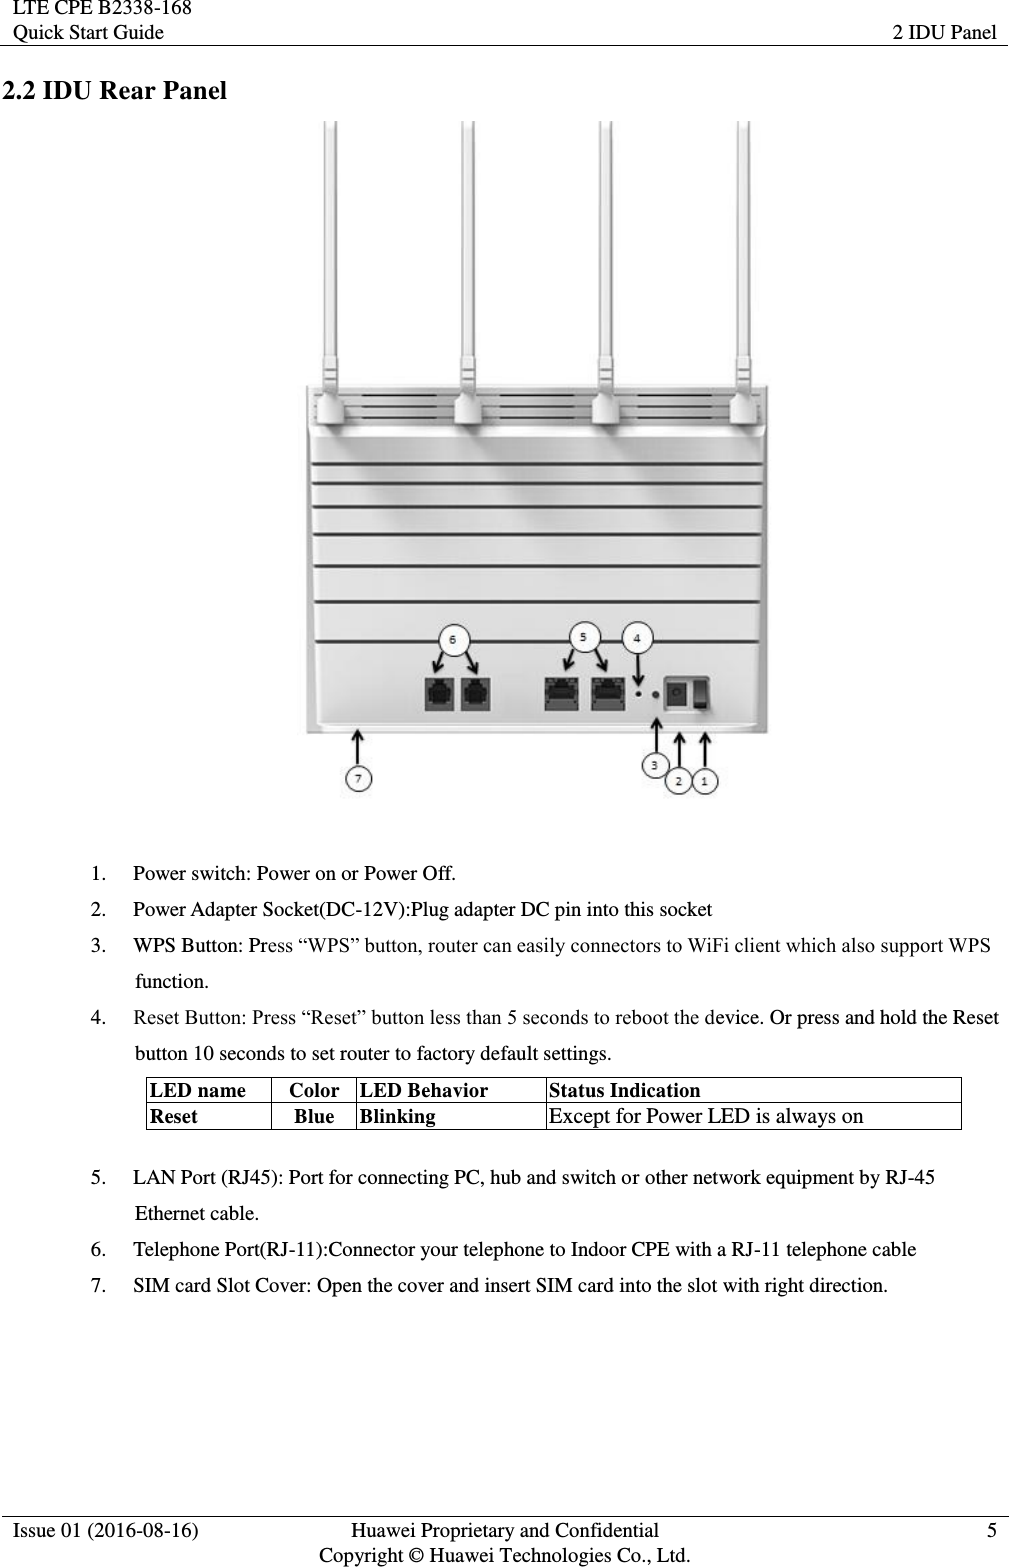 LTE CPE B2338-168 Quick Start Guide 2 IDU Panel  Issue 01 (2016-08-16) Huawei Proprietary and Confidential         Copyright © Huawei Technologies Co., Ltd. 5  2.2 IDU Rear Panel   1. Power switch: Power on or Power Off. 2. Power Adapter Socket(DC-12V):Plug adapter DC pin into this socket 3. WPS Button: Prfunction. 4. evice. Or press and hold the Reset button 10 seconds to set router to factory default settings. LED name Color LED Behavior Status Indication Reset Blue Blinking Except for Power LED is always on  5. LAN Port (RJ45): Port for connecting PC, hub and switch or other network equipment by RJ-45 Ethernet cable. 6. Telephone Port(RJ-11):Connector your telephone to Indoor CPE with a RJ-11 telephone cable 7. SIM card Slot Cover: Open the cover and insert SIM card into the slot with right direction. 